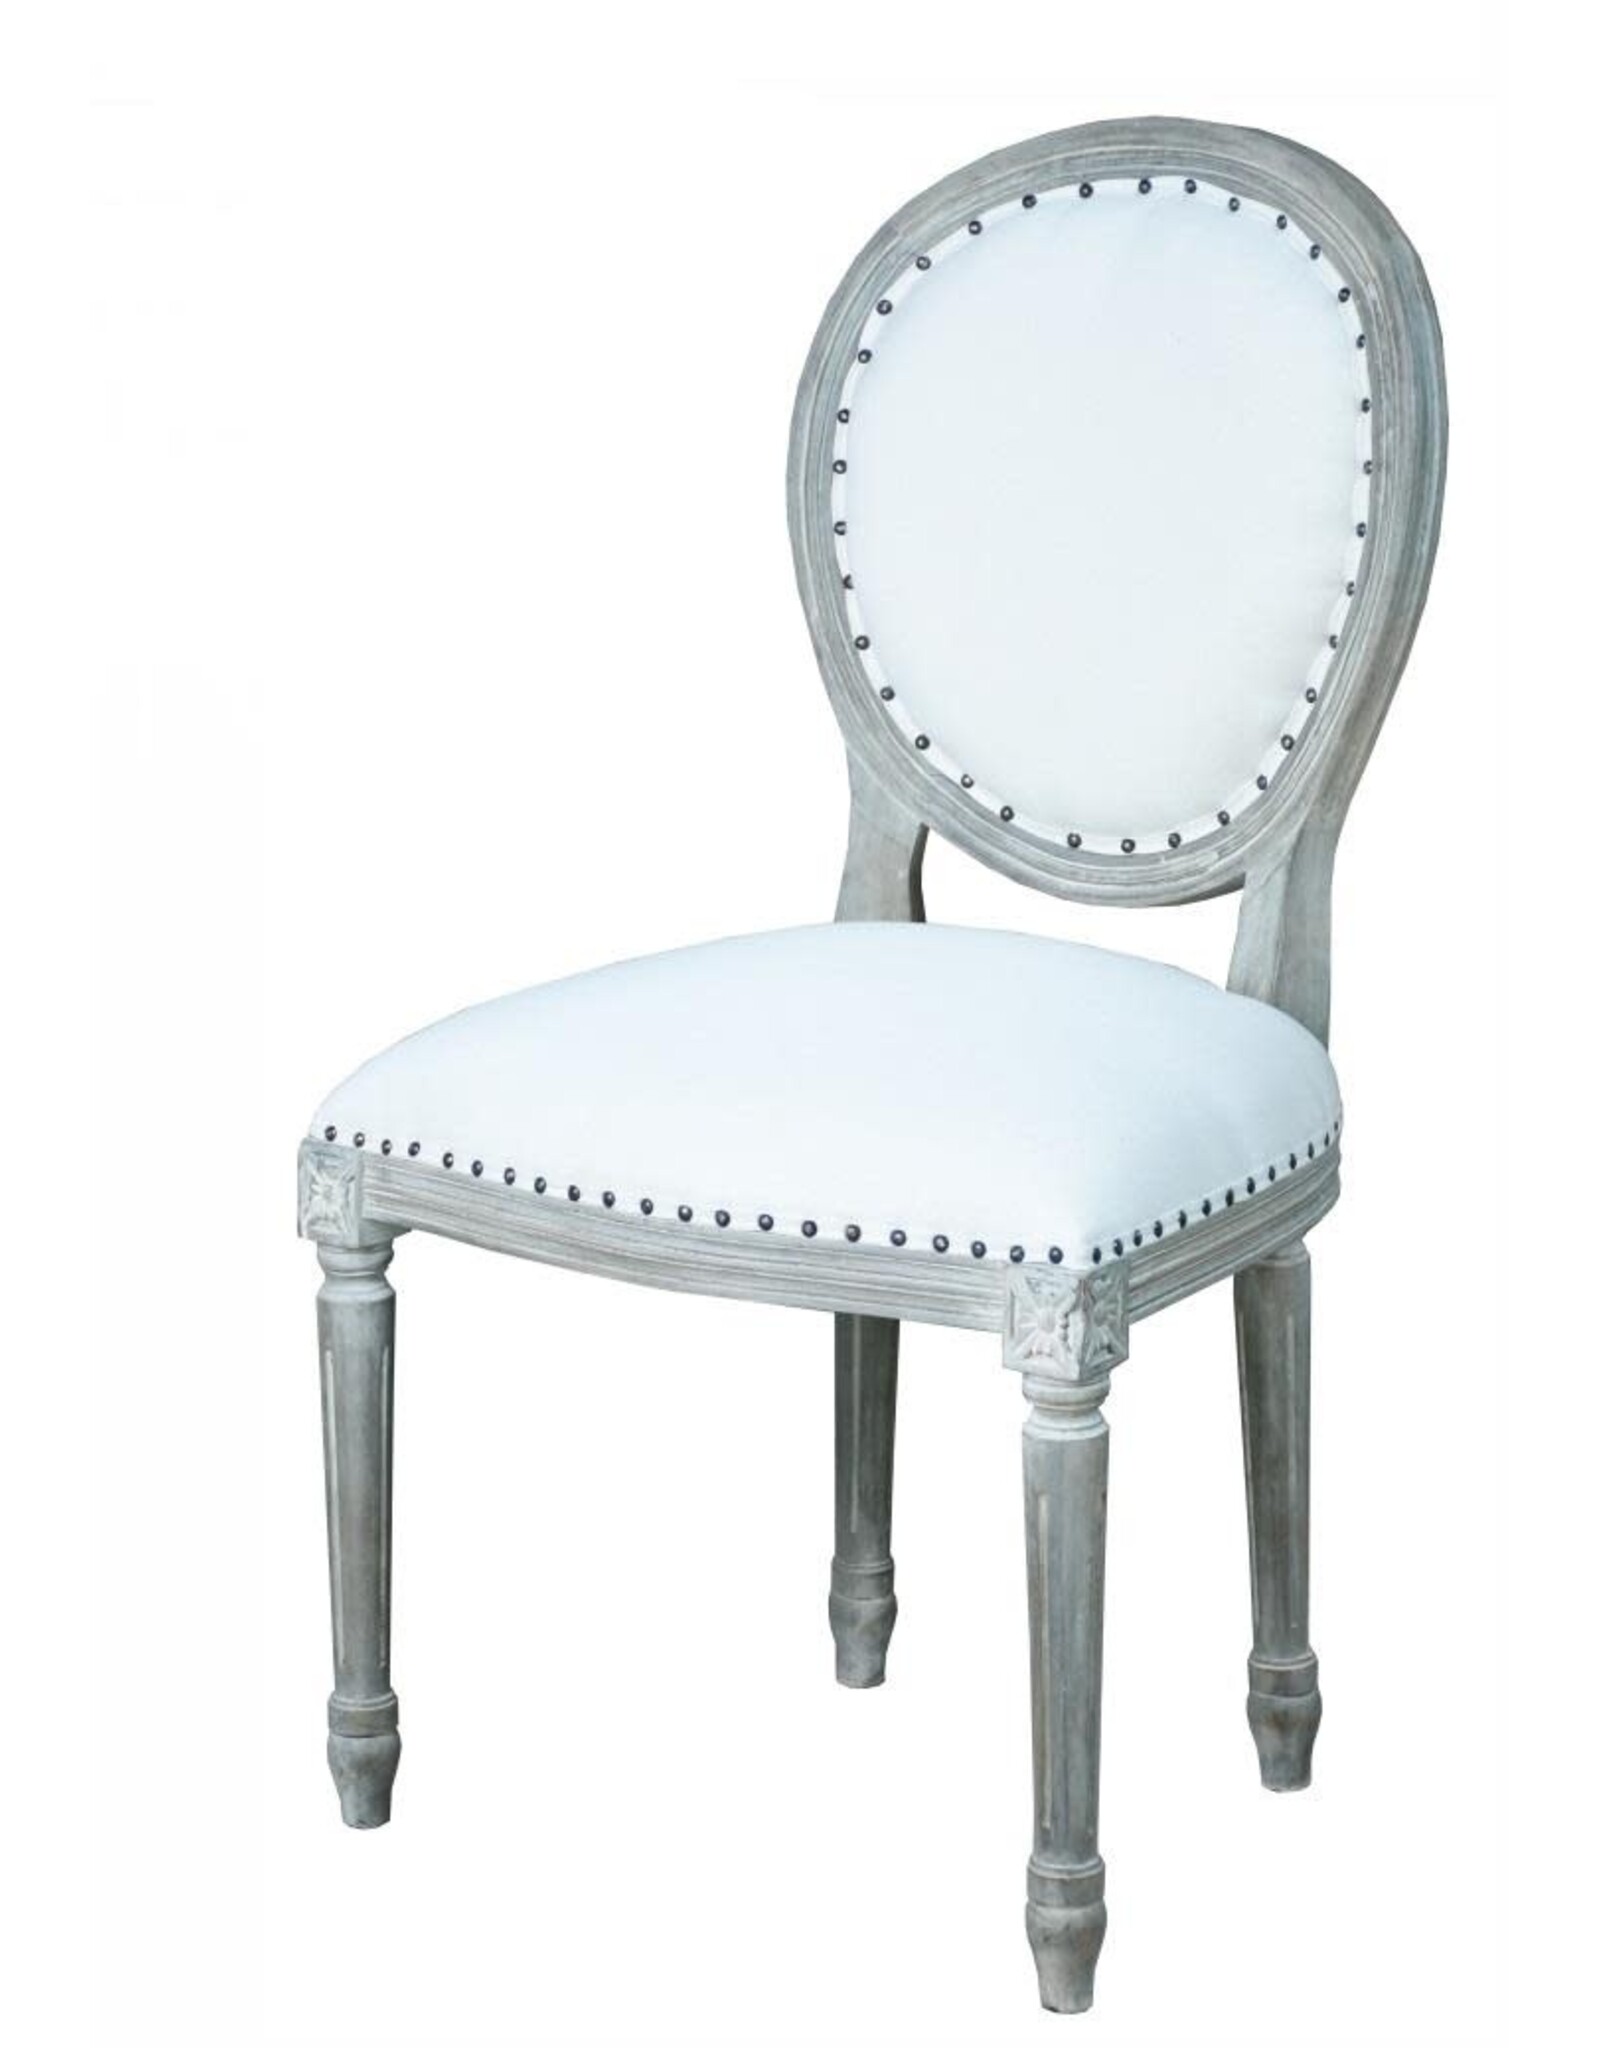 CHA040 Howthorne Dining chair 21.6x22.5x40.1